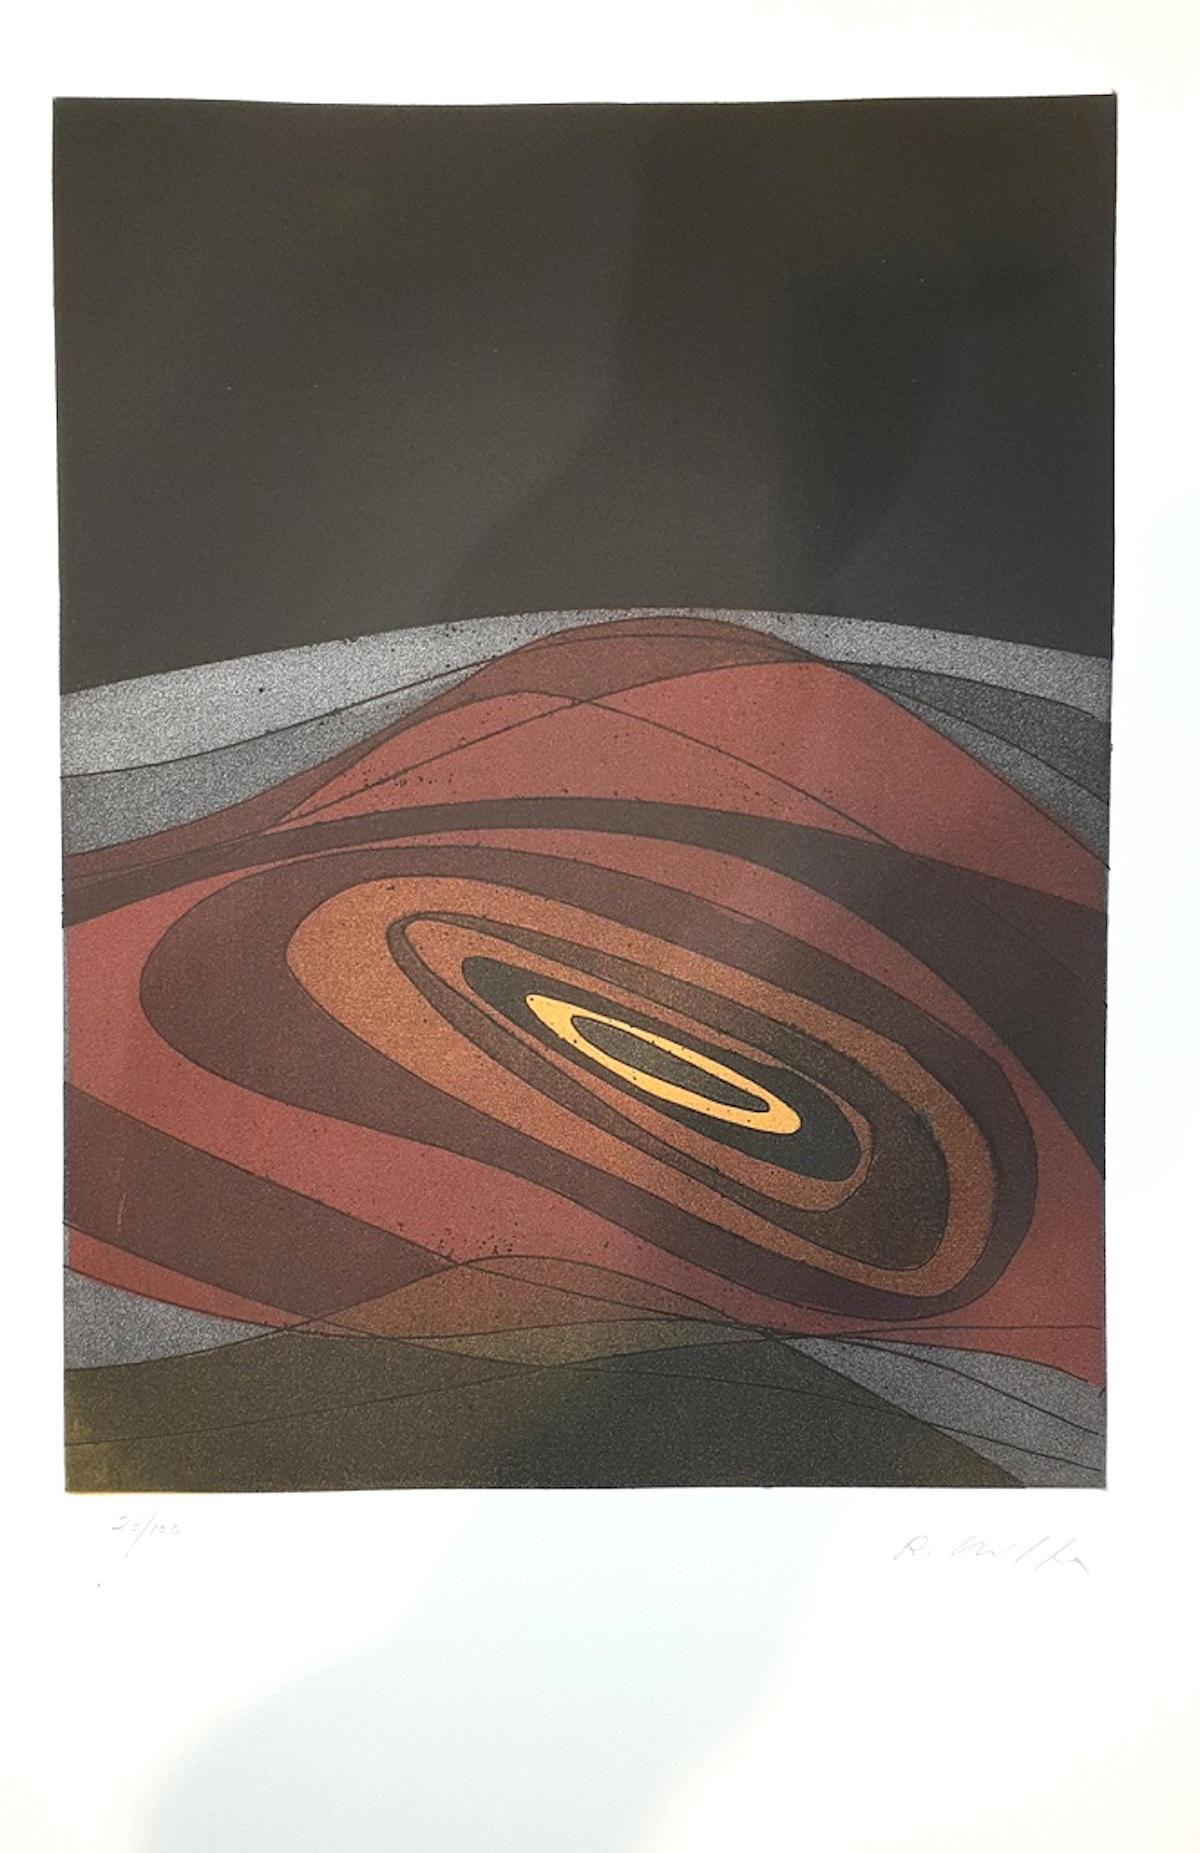 Roberto Crippa Abstract Print - Plate V from Suns/Landscapes - Etching by R. Crippa - 1971/72